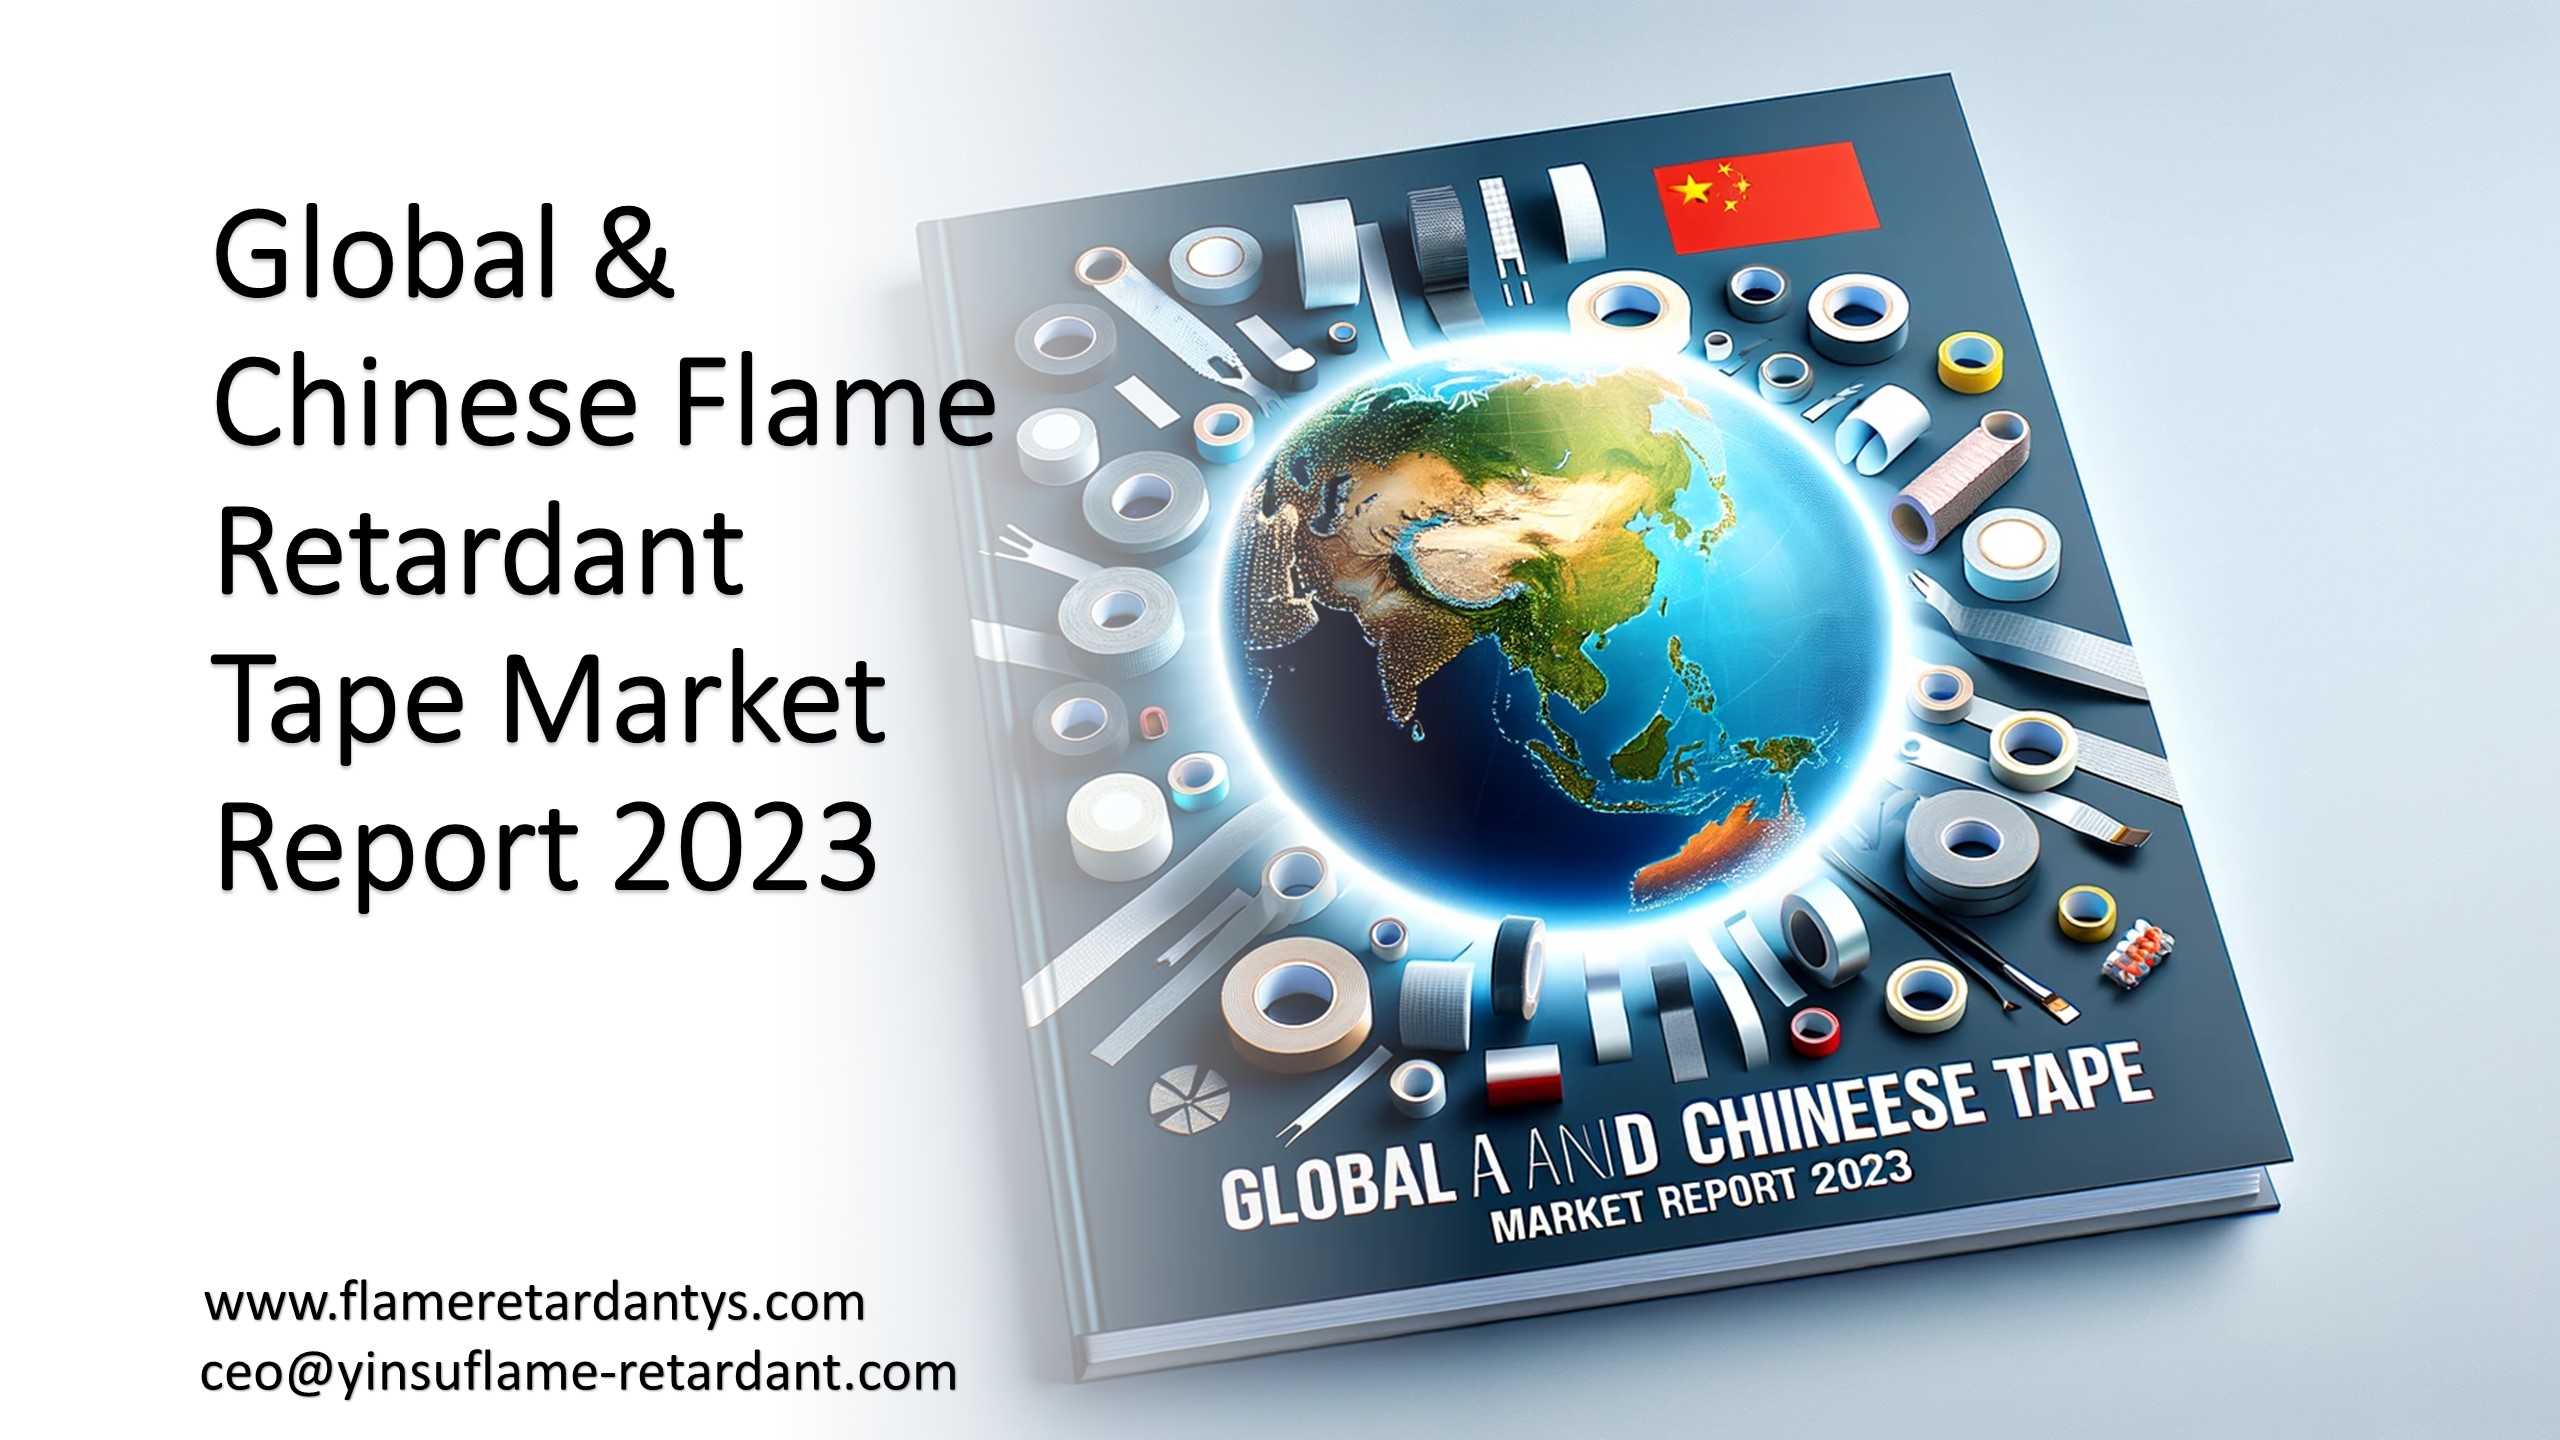 Global And Chinese Flame Retardant Tape Market Report 2023